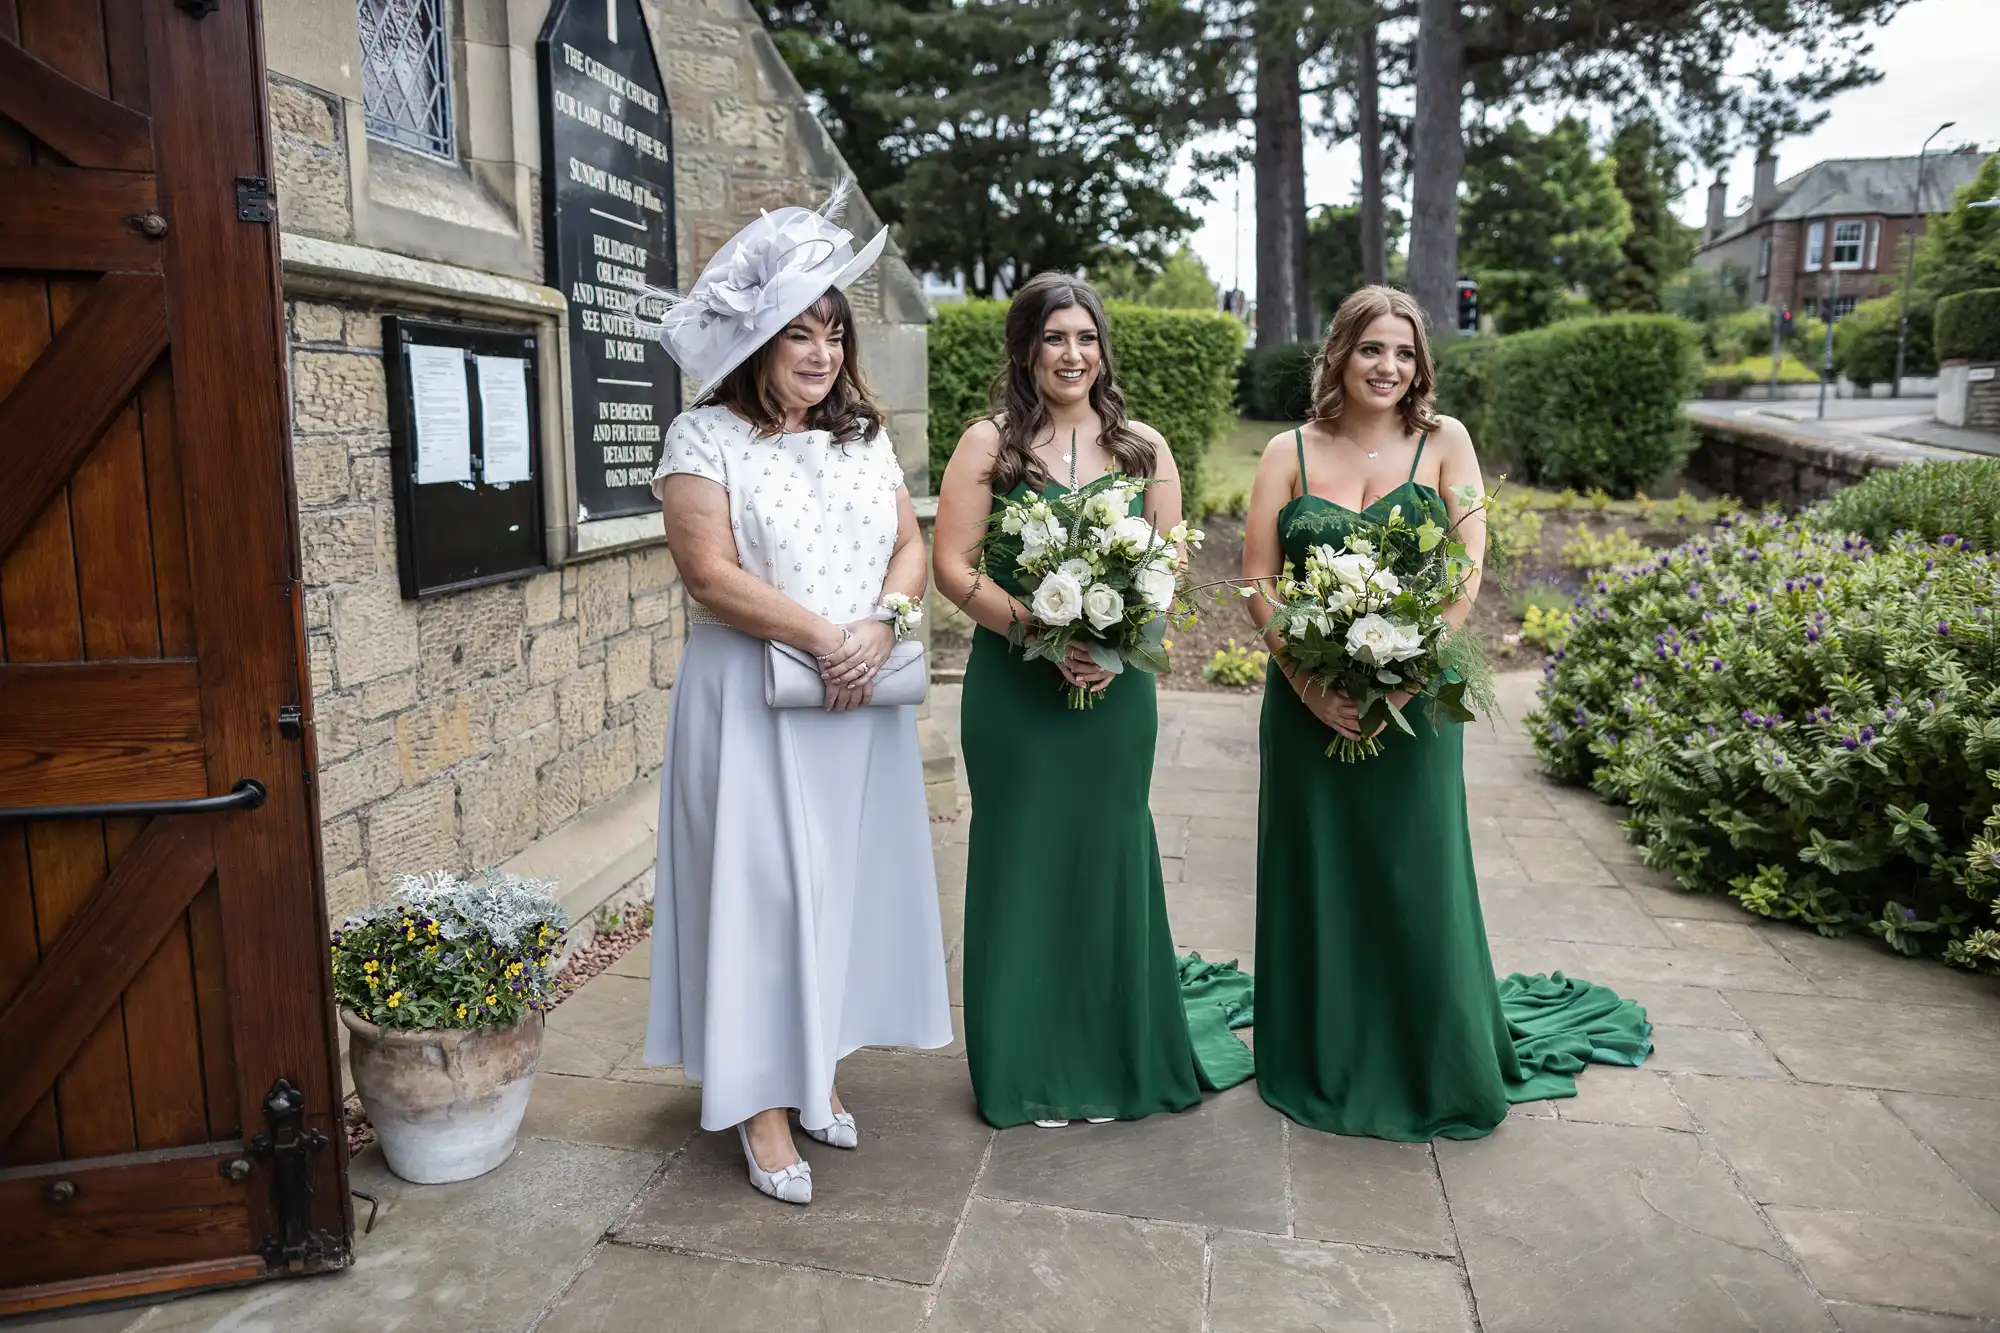 Three women in formal attire, two in green gowns and one in a white dress with a hat, holding bouquets outside a stone building.